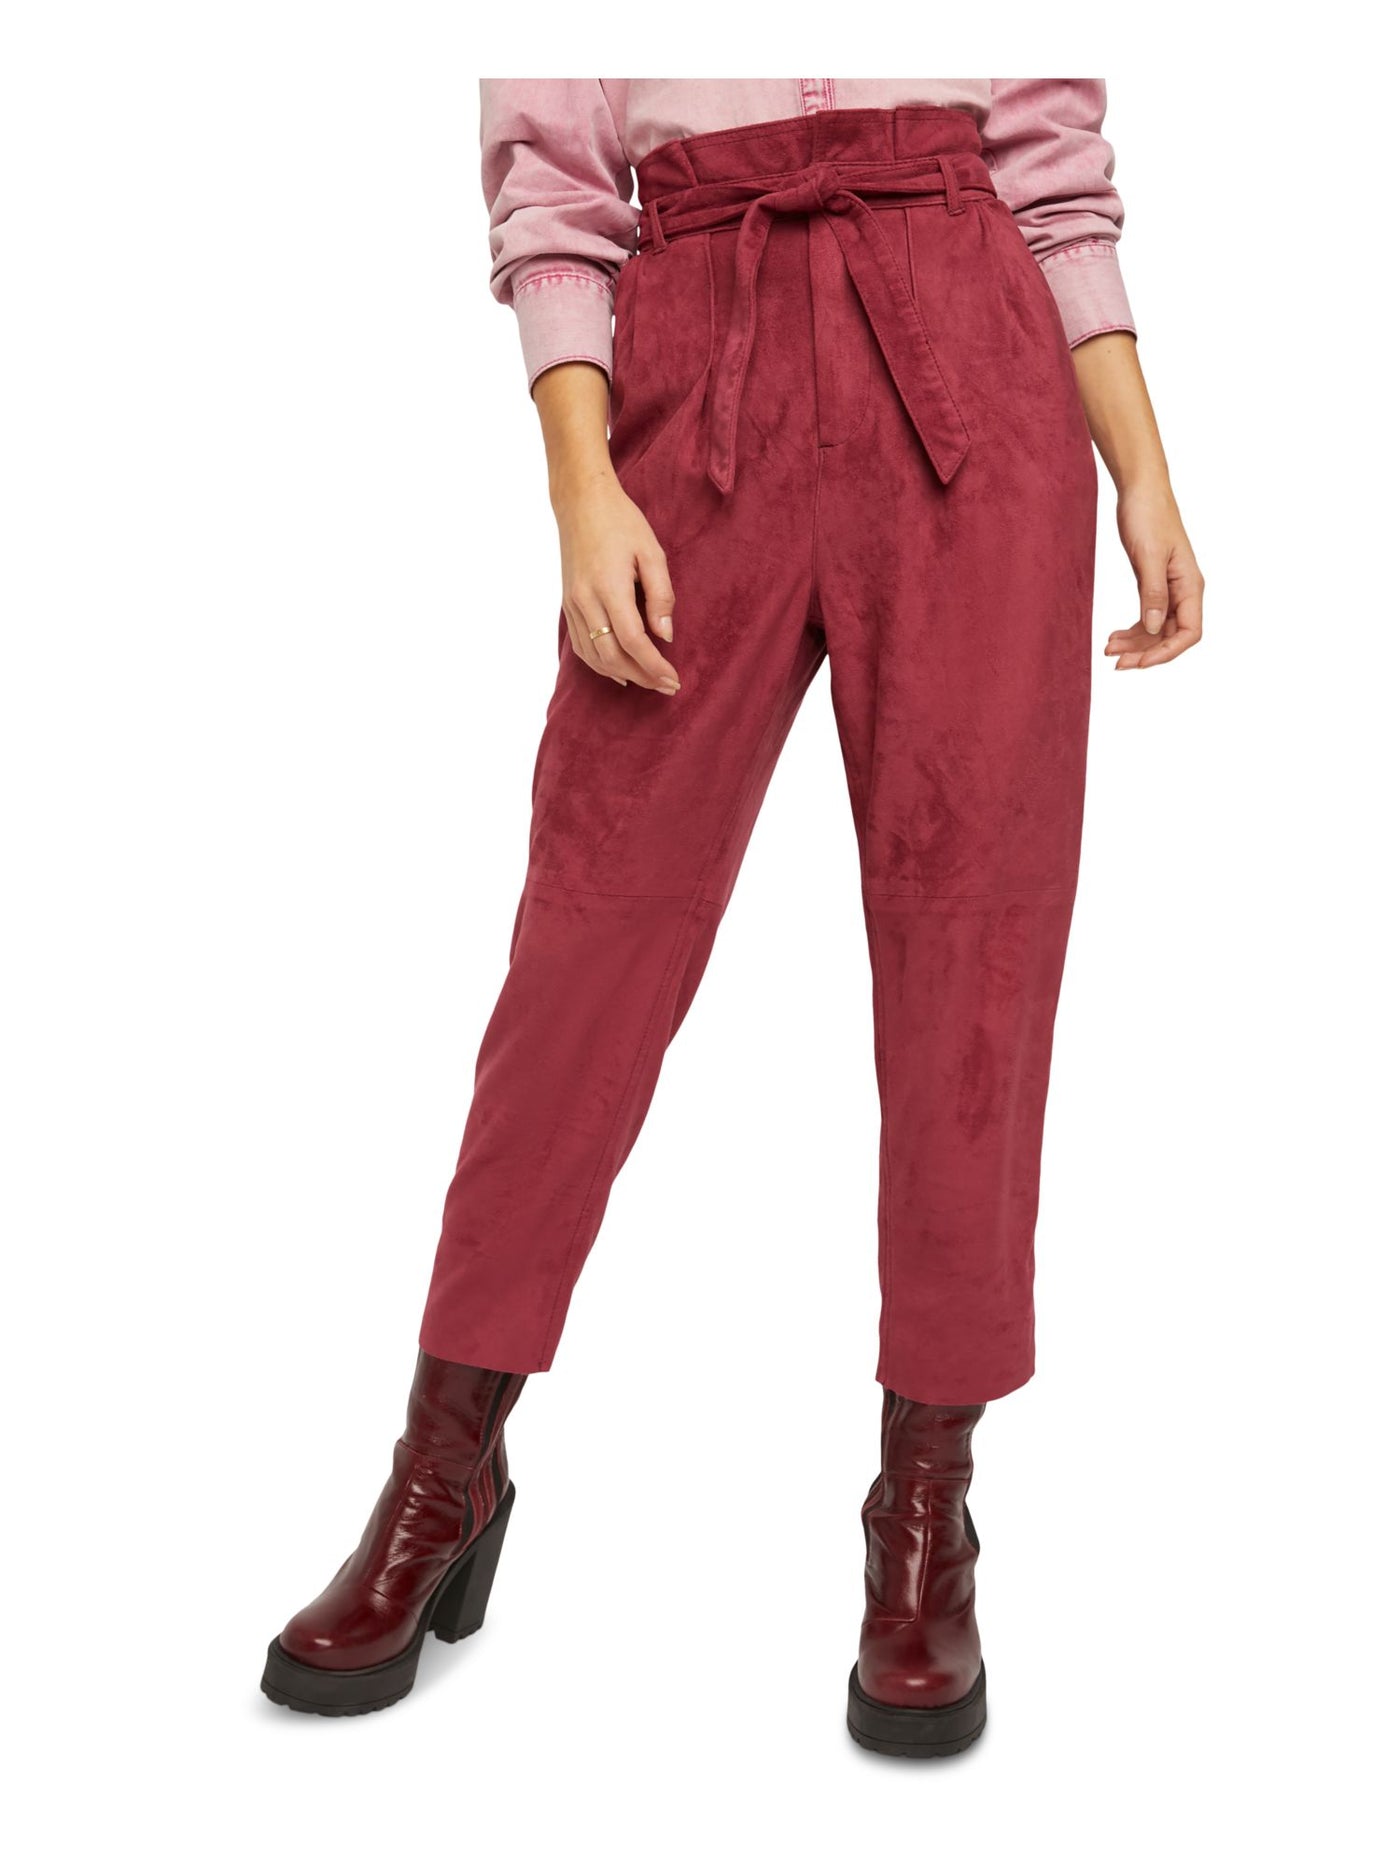 FREE PEOPLE Womens Burgundy Faux Suede Belted Cropped Pants Size: 0